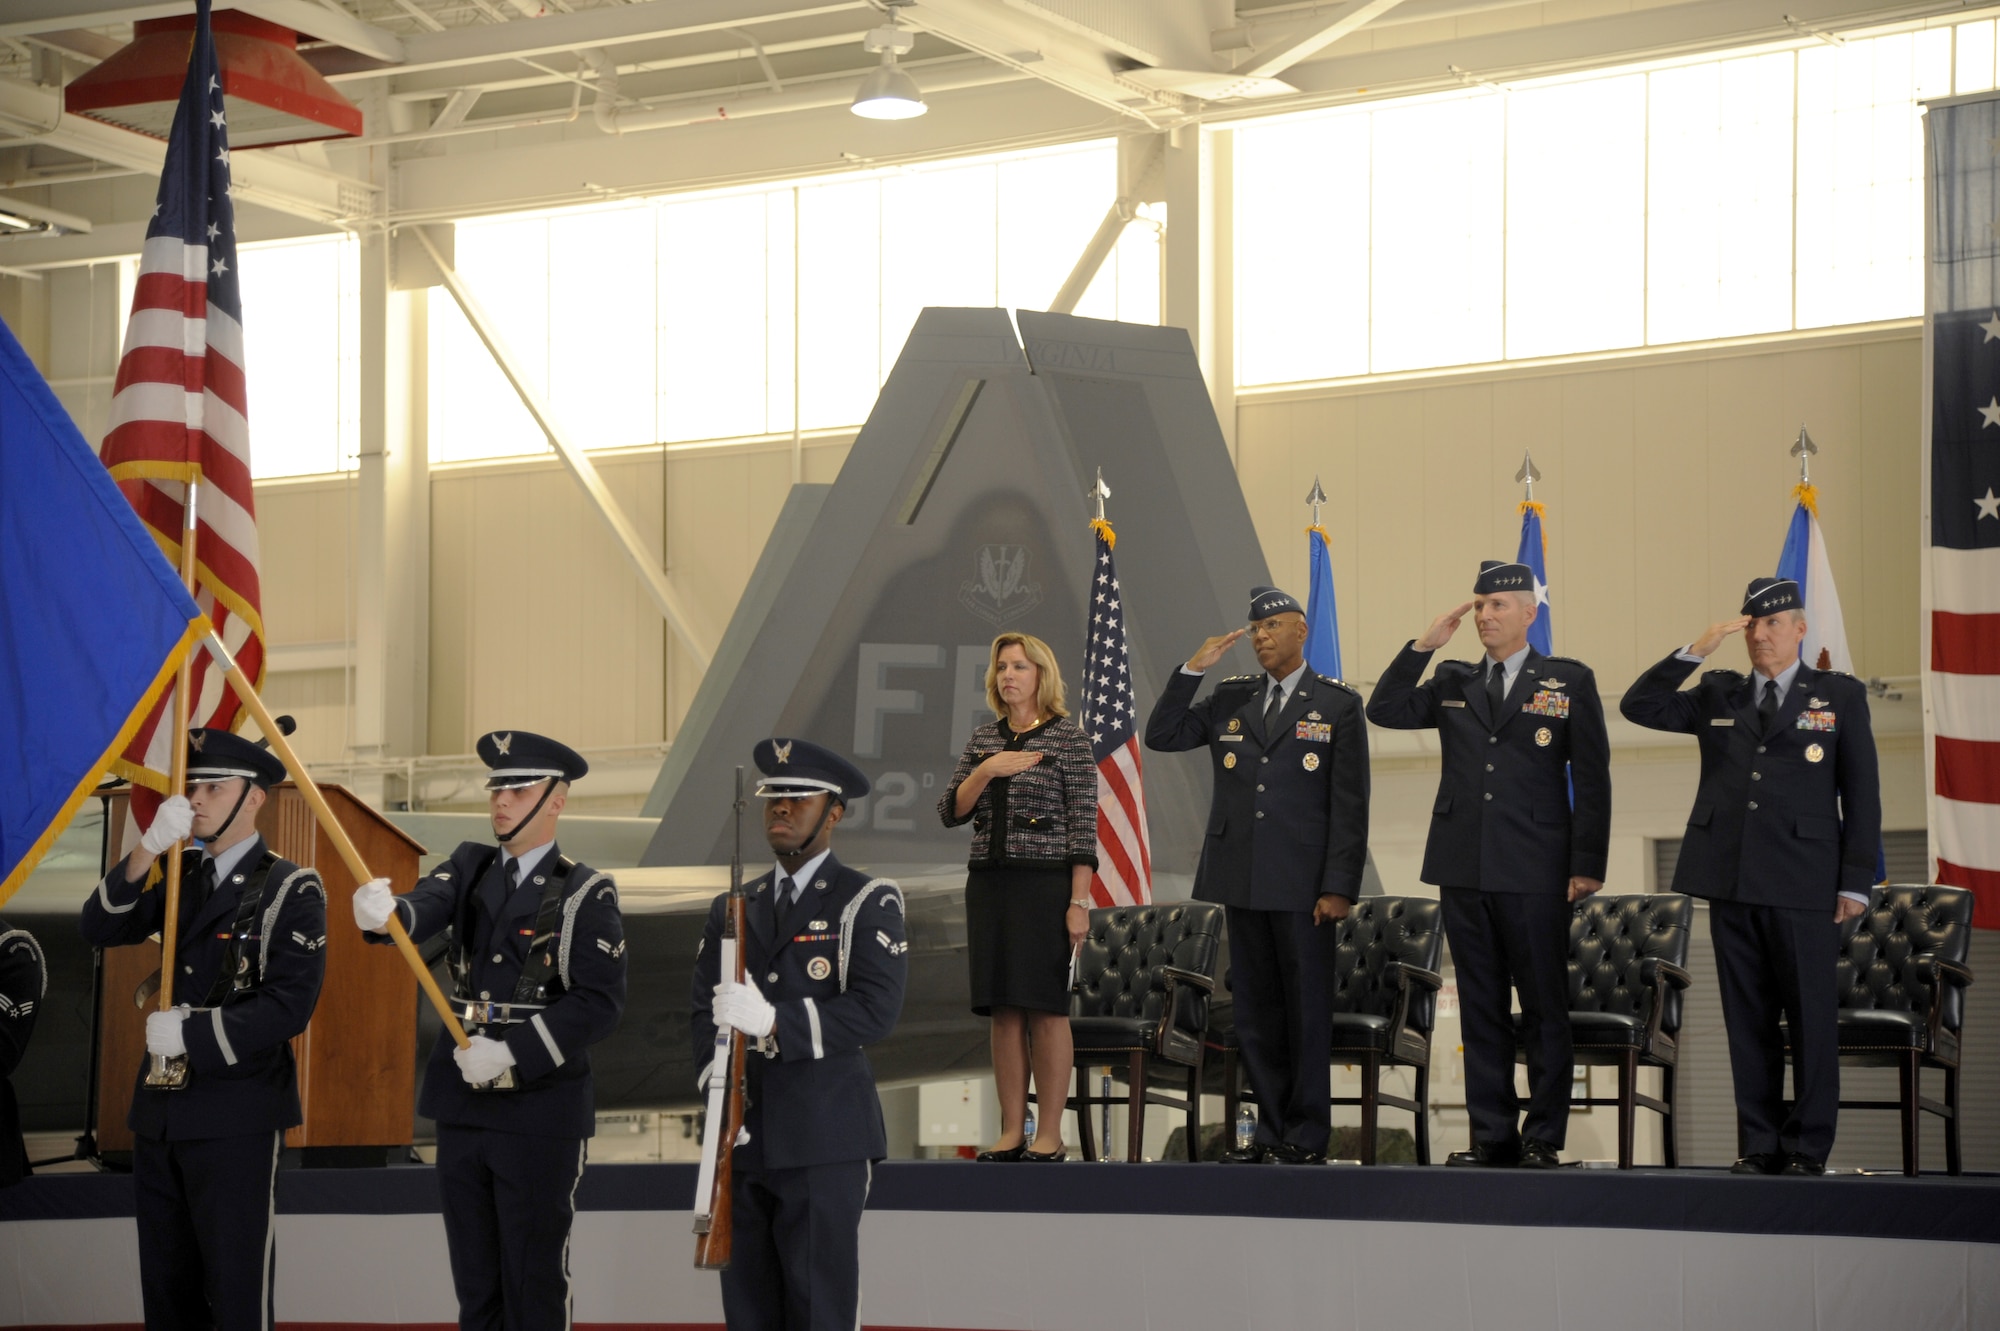 The 633rd Air Base Wing Honor Guard presents the colors at the Air Combat Command Change of Command ceremony at Langley Air Force Base, Va., Nov. 4, 2014. U.S. Air Force Gen Hawk Carlisle assumed command of ACC from Gen. Mike Hostage, who retired after 37 years of service to the Air Force. (U.S. Air Force photo by Staff Sgt. Candice Page/Released)